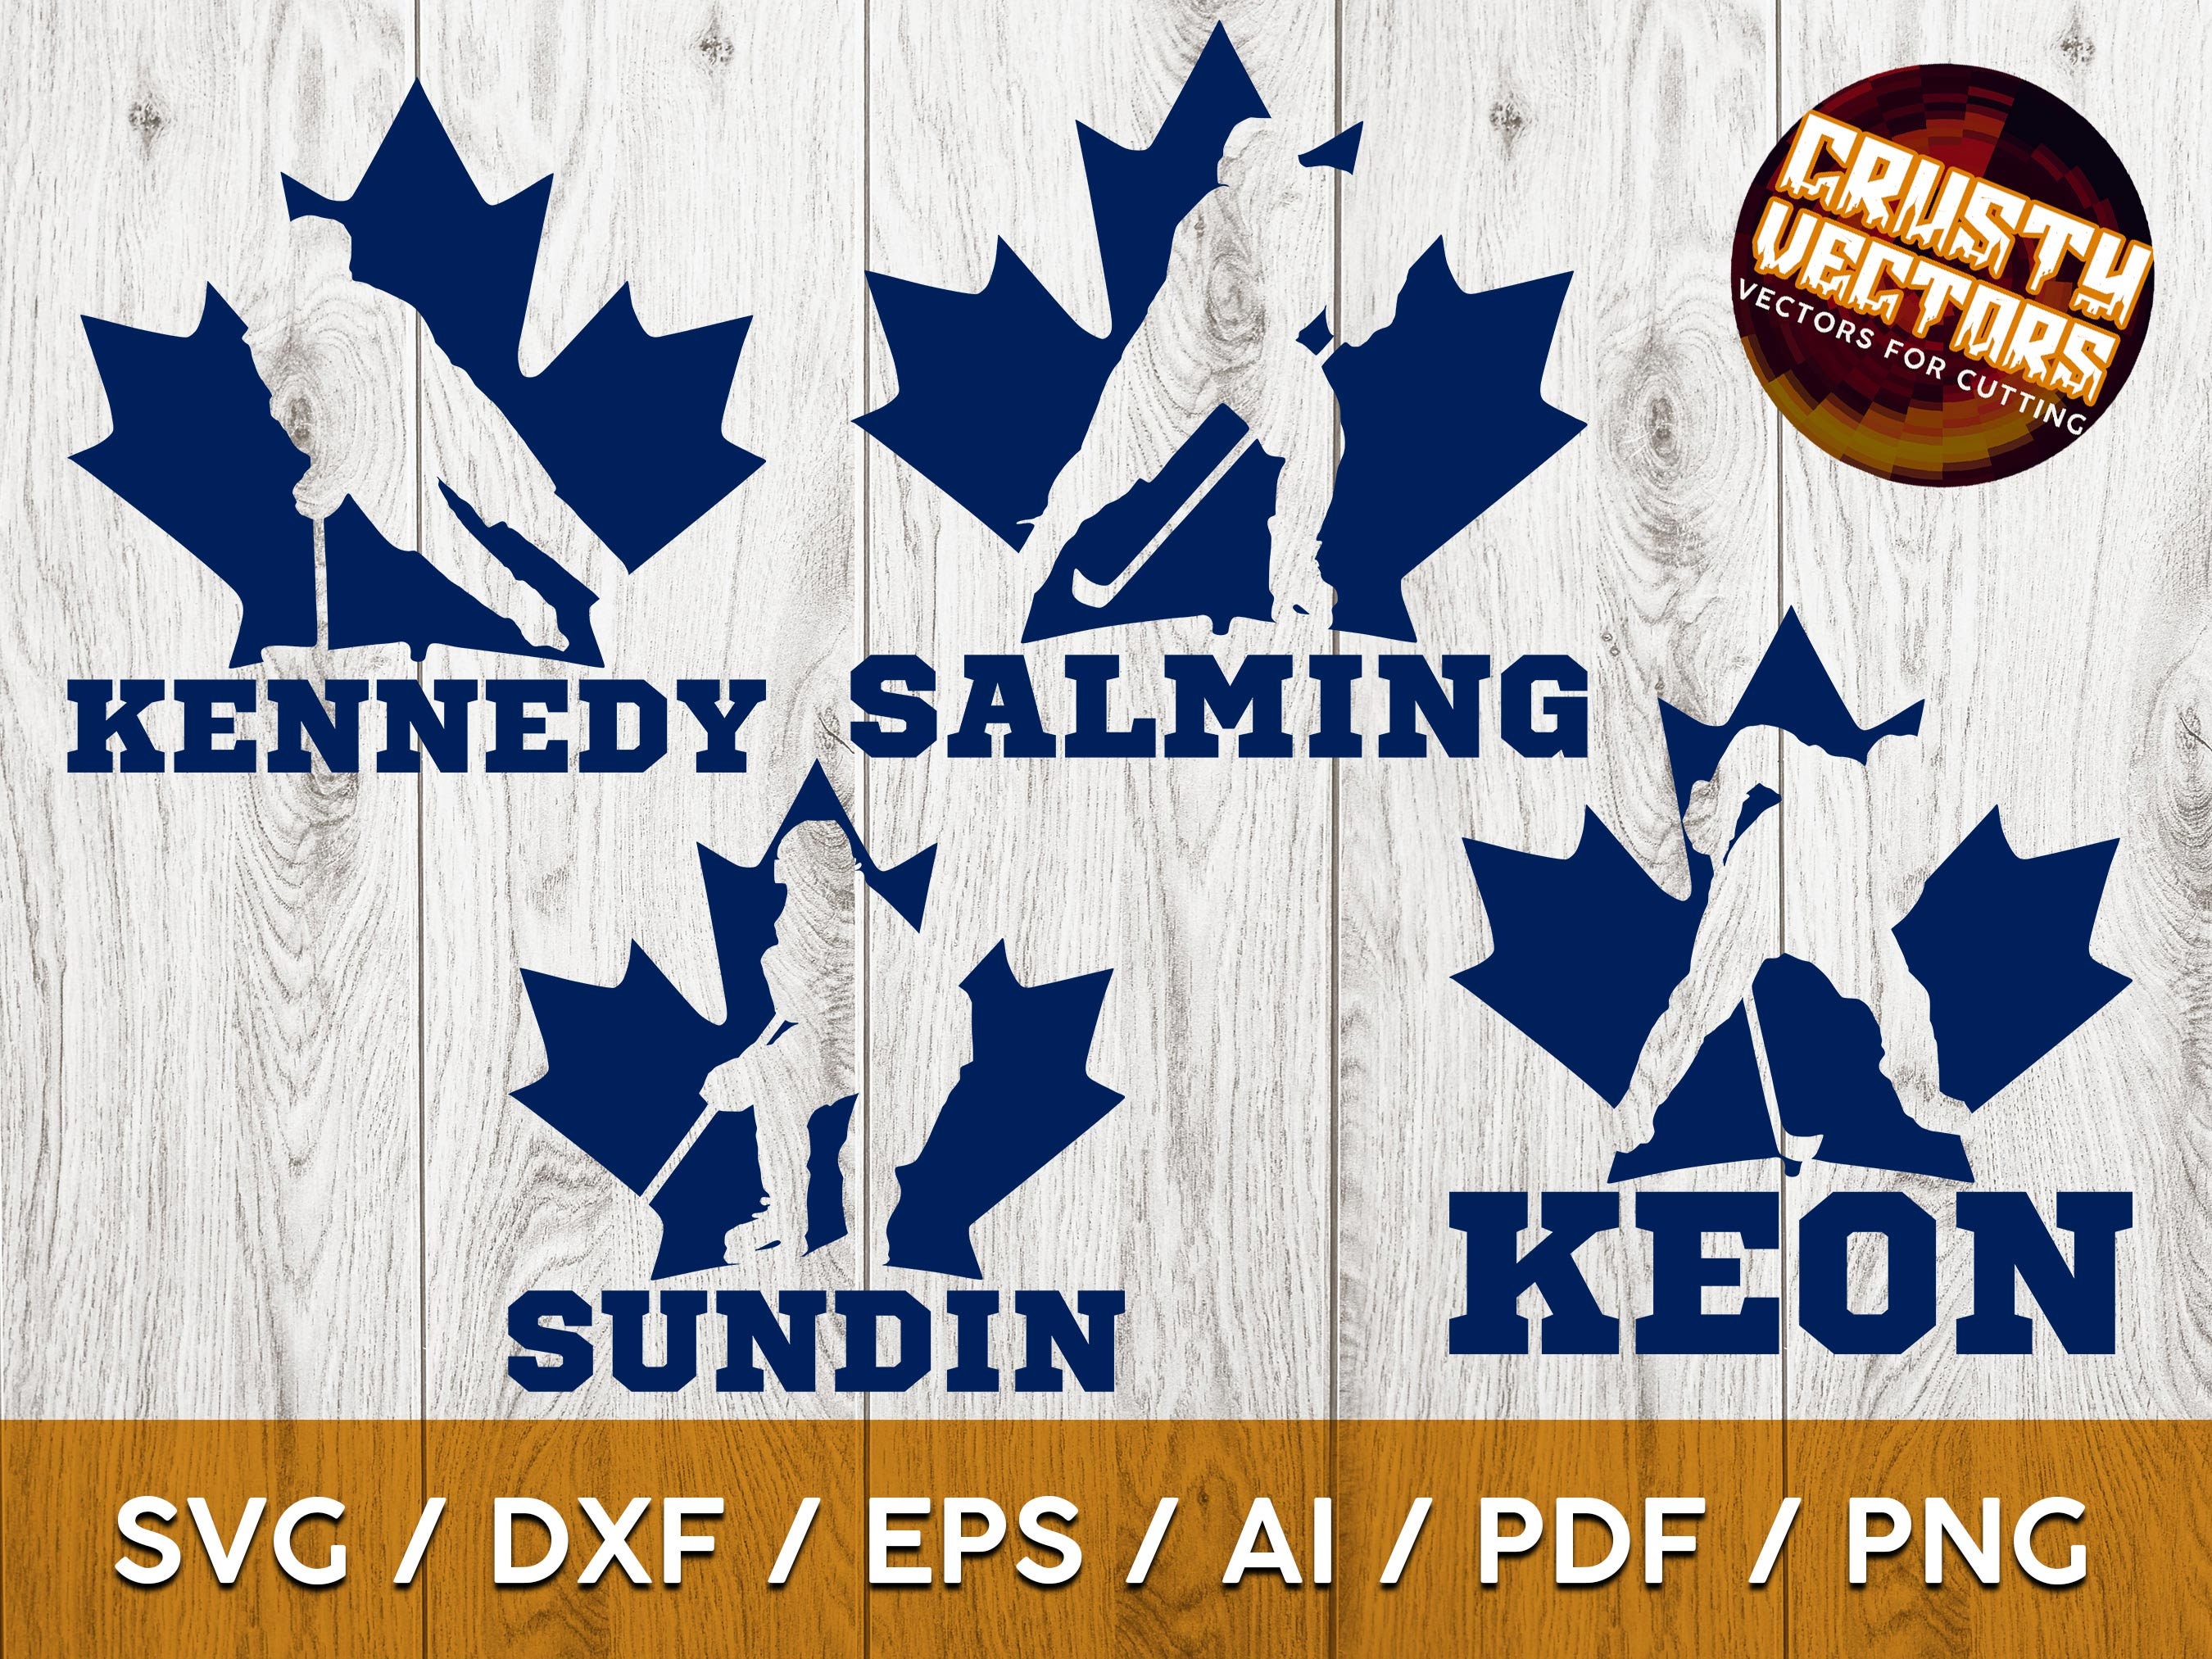 Toronto Maple Leafs Logo PNG Transparent & SVG Vector - Freebie Supply